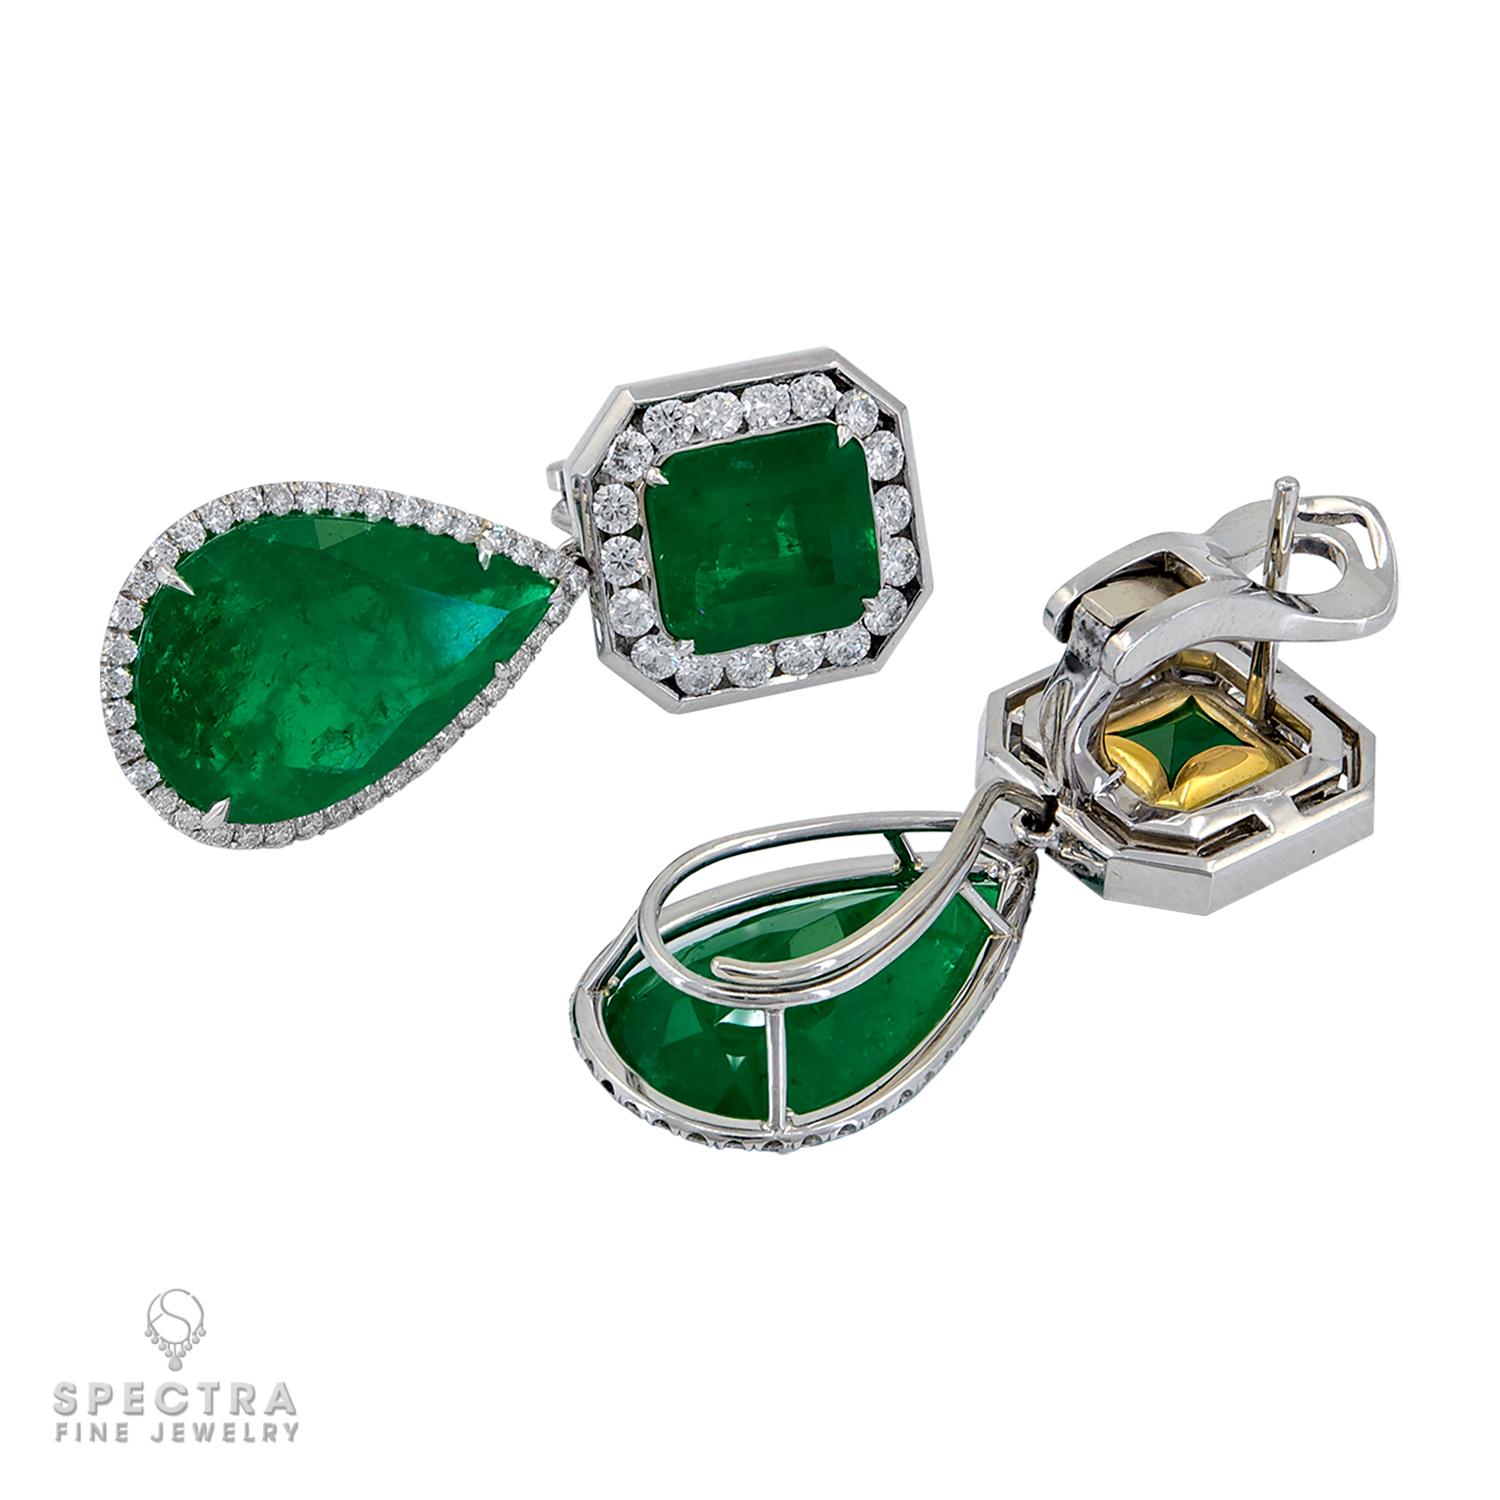 Colombian emeralds are arguably the gold standard the world over and have a special historical allure that dates back to the 16th century. There is a lot of myth around their origin, which makes them more desirable. They are said to have a warmer